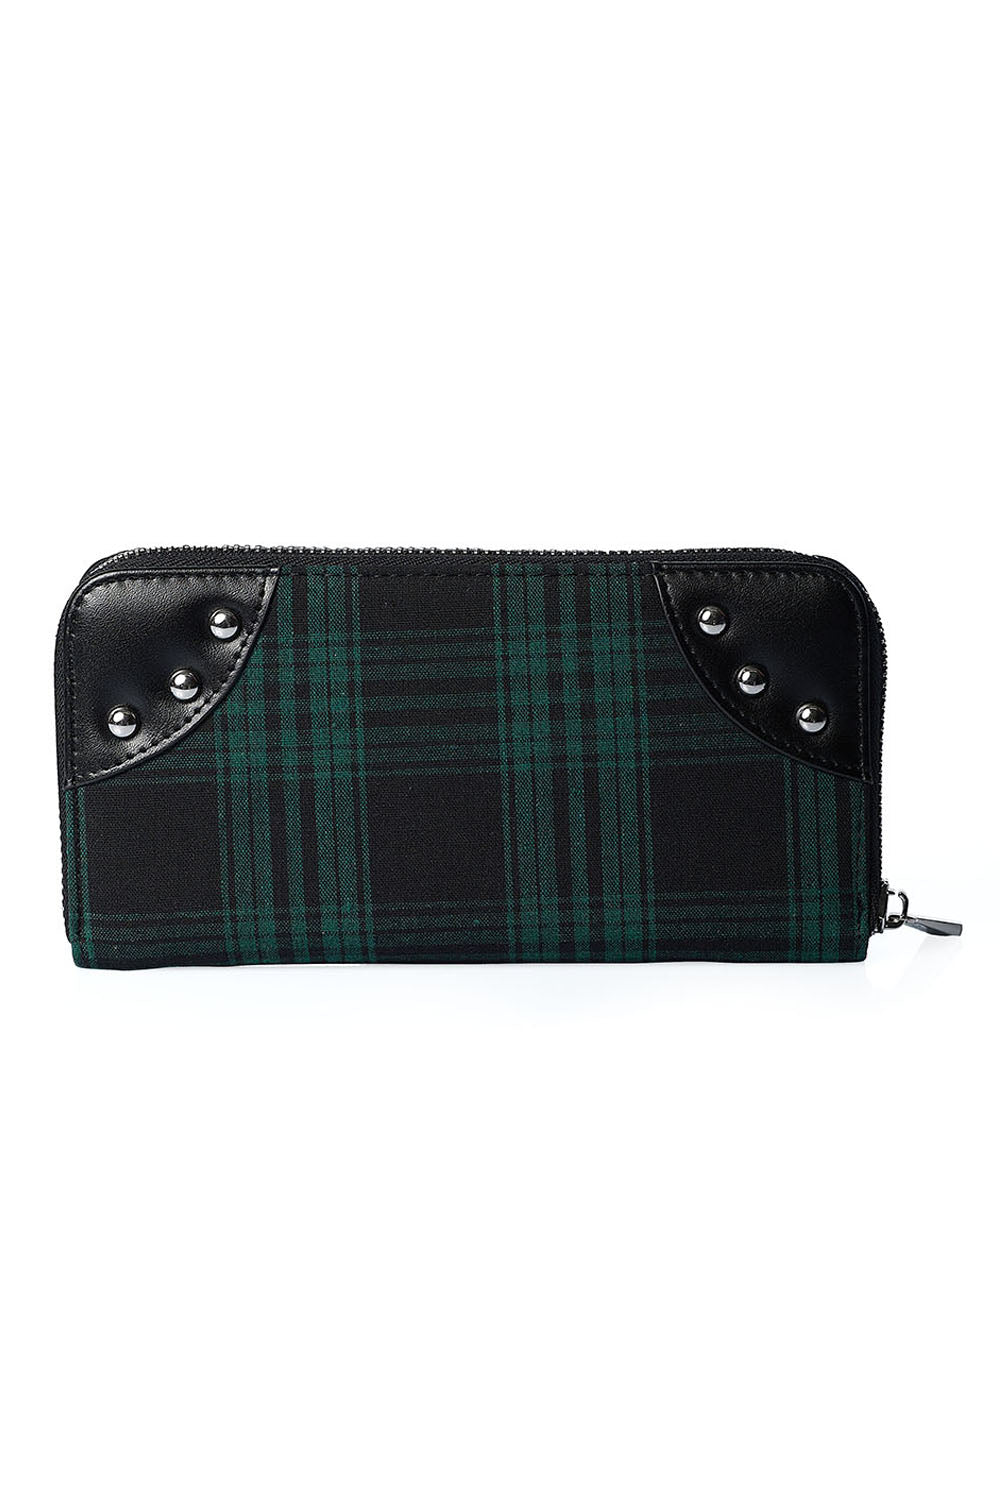 Banned apparel Handcuff Wallet | Green